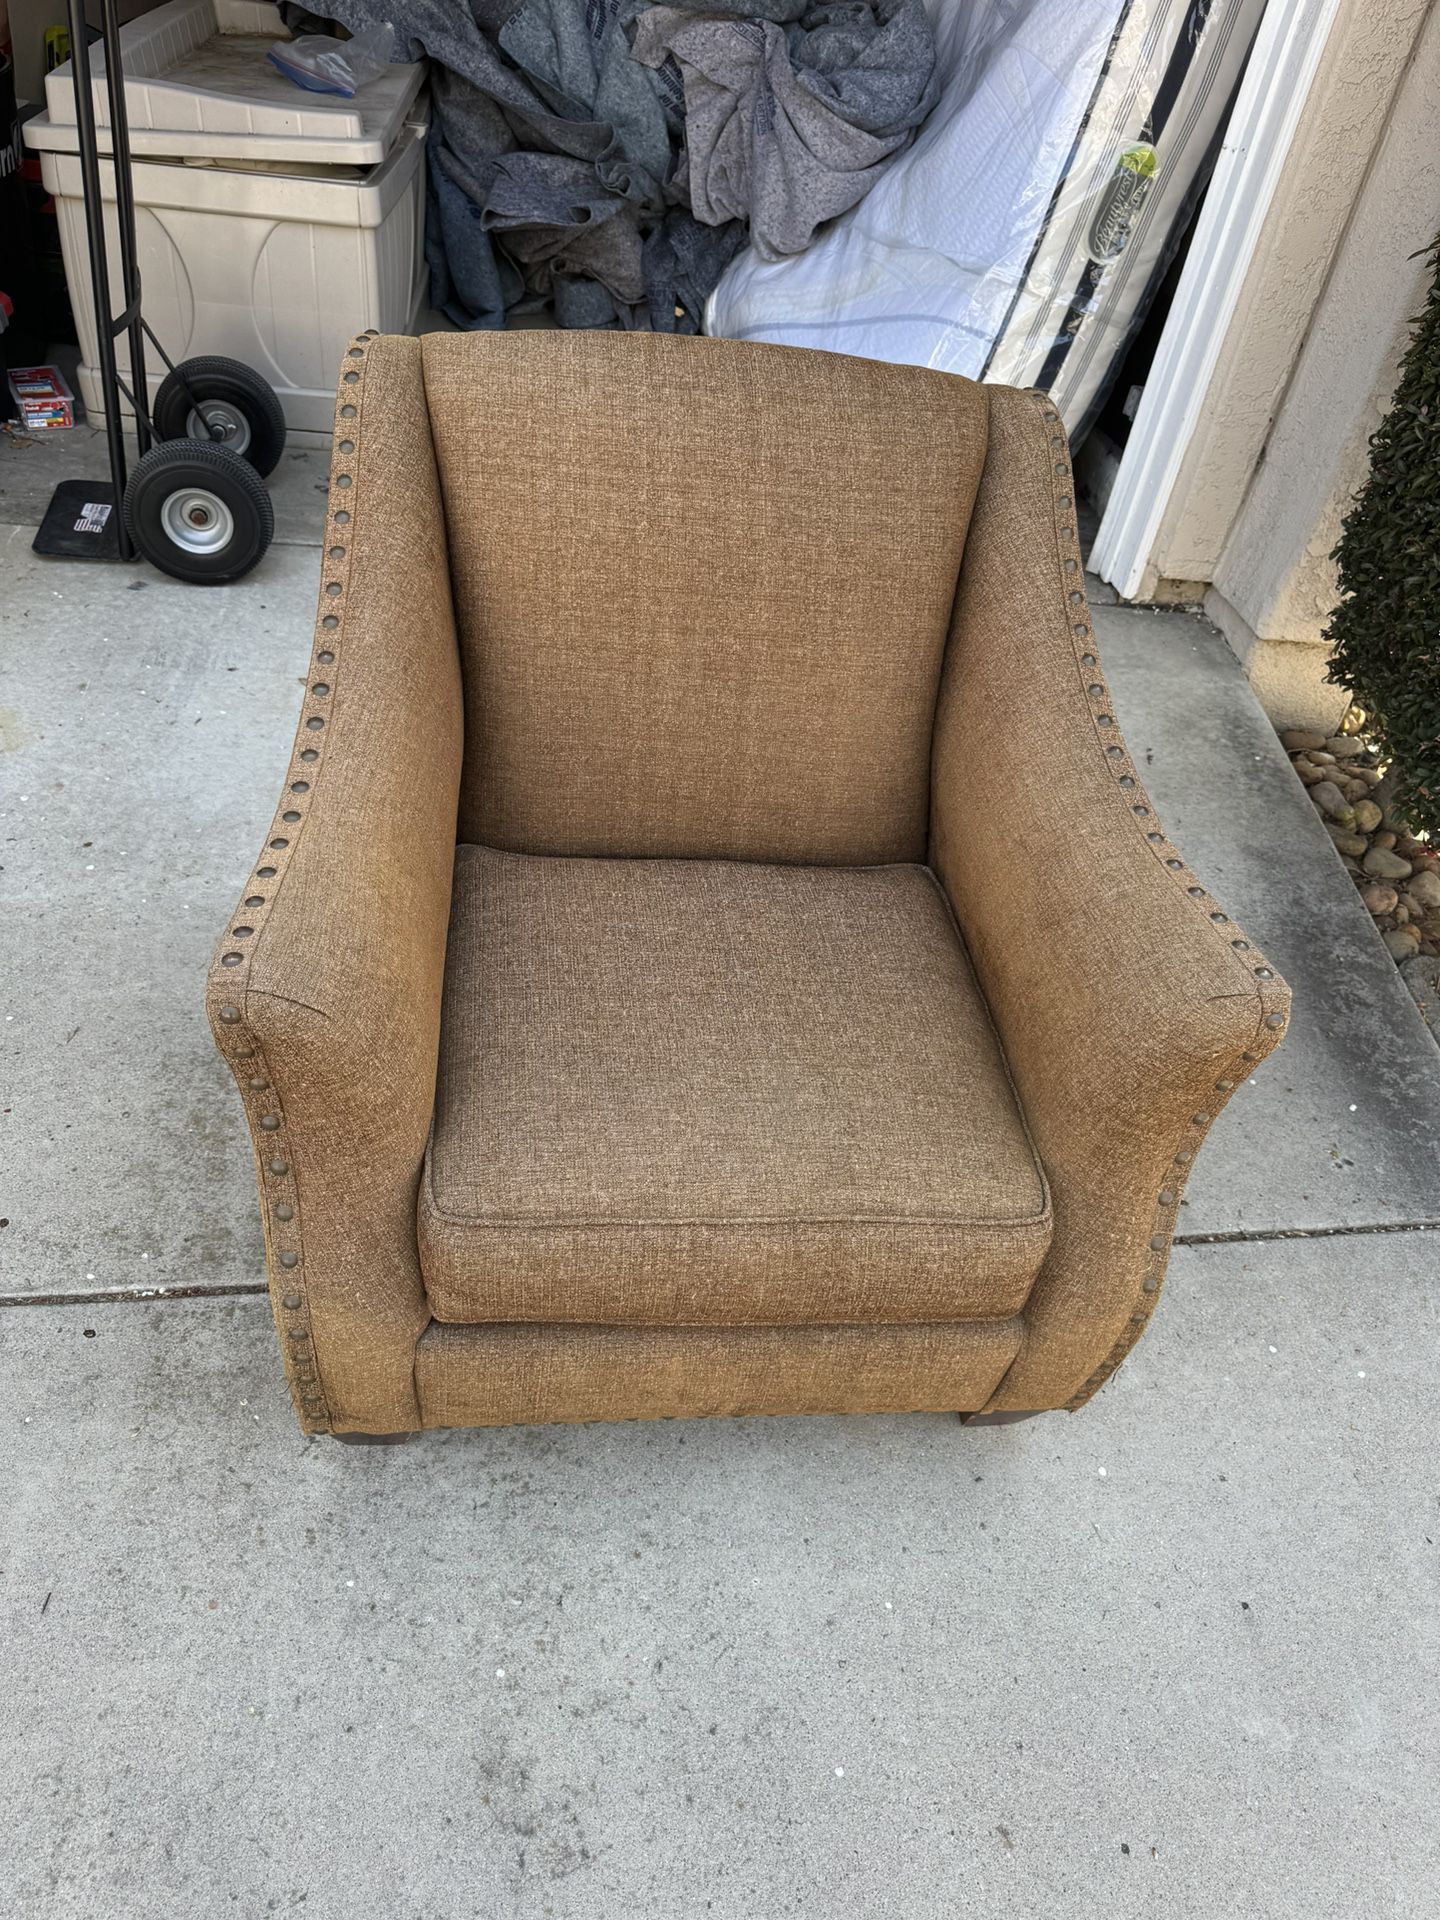 Excellent Condition Chair 